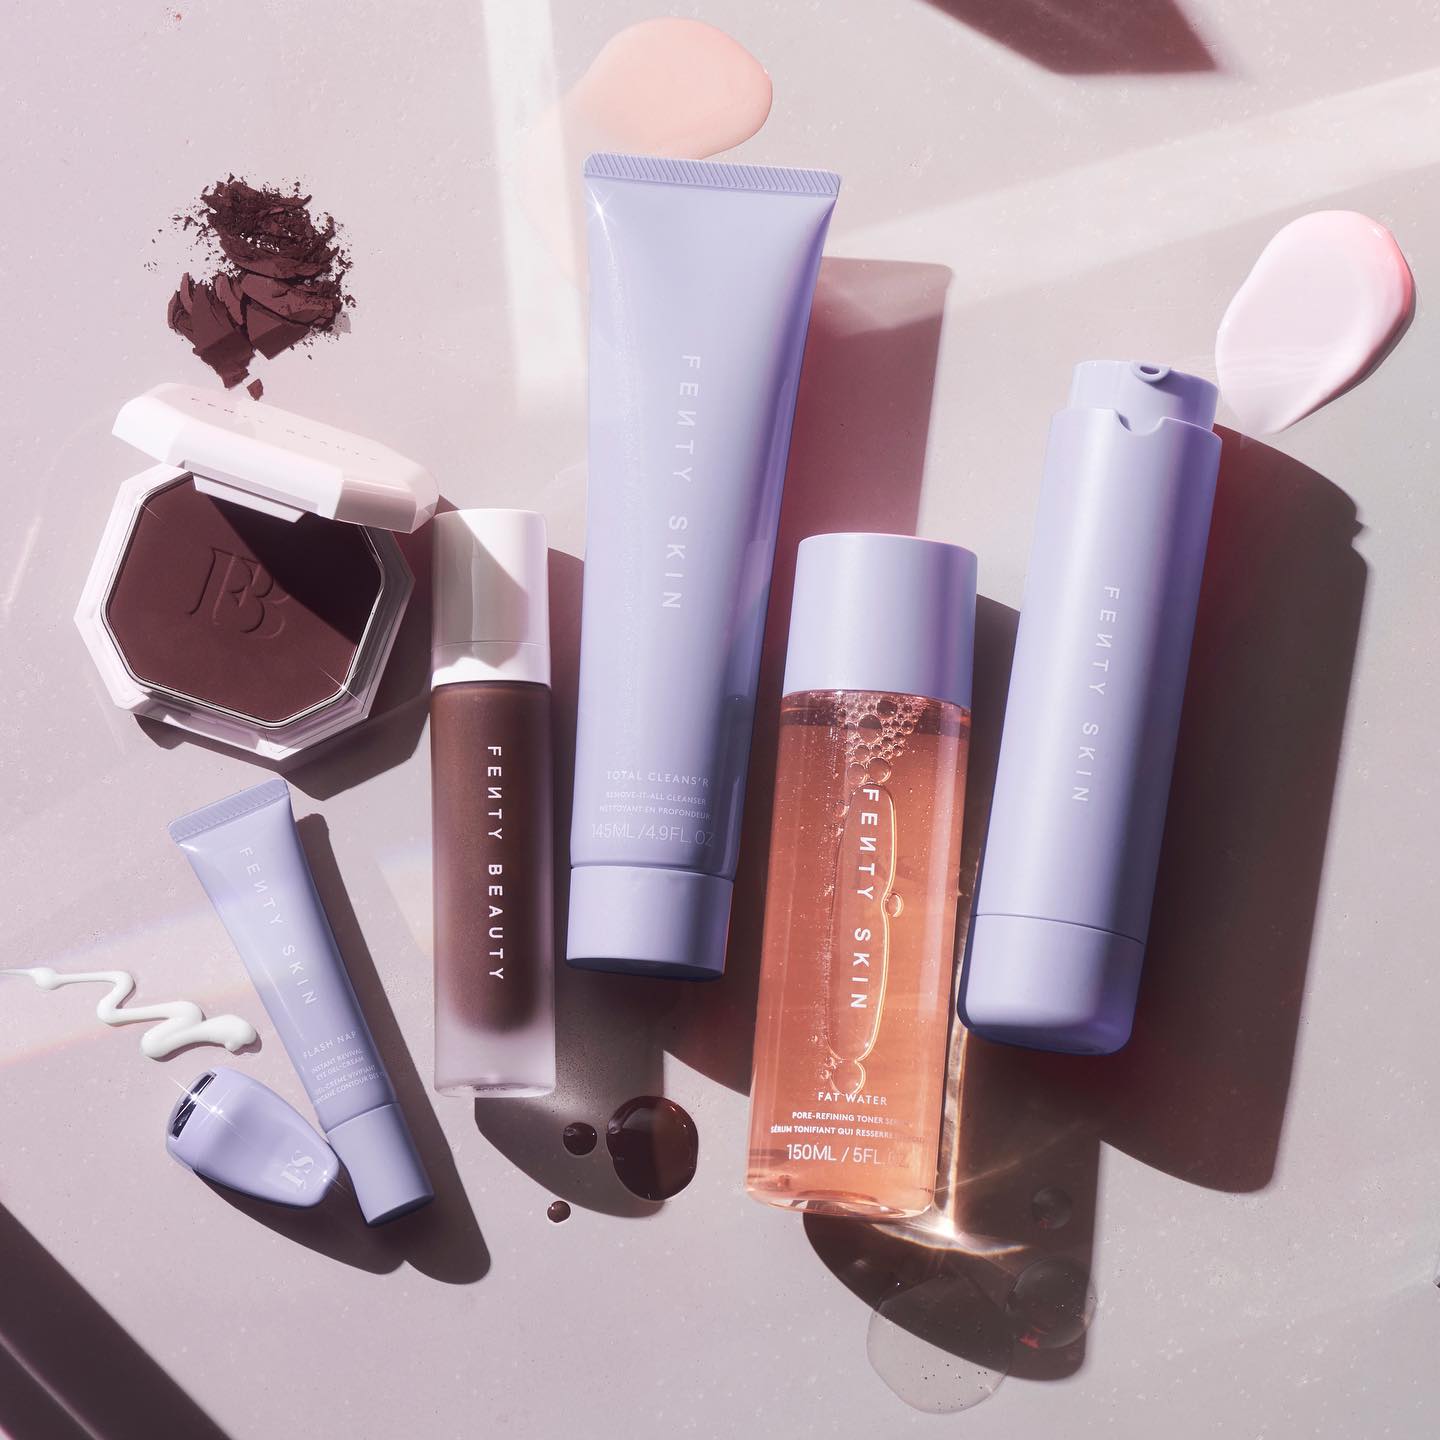 A flat lay image of beauty and skin products from Fenty Beauty and Fenty Skin by Rihanna.